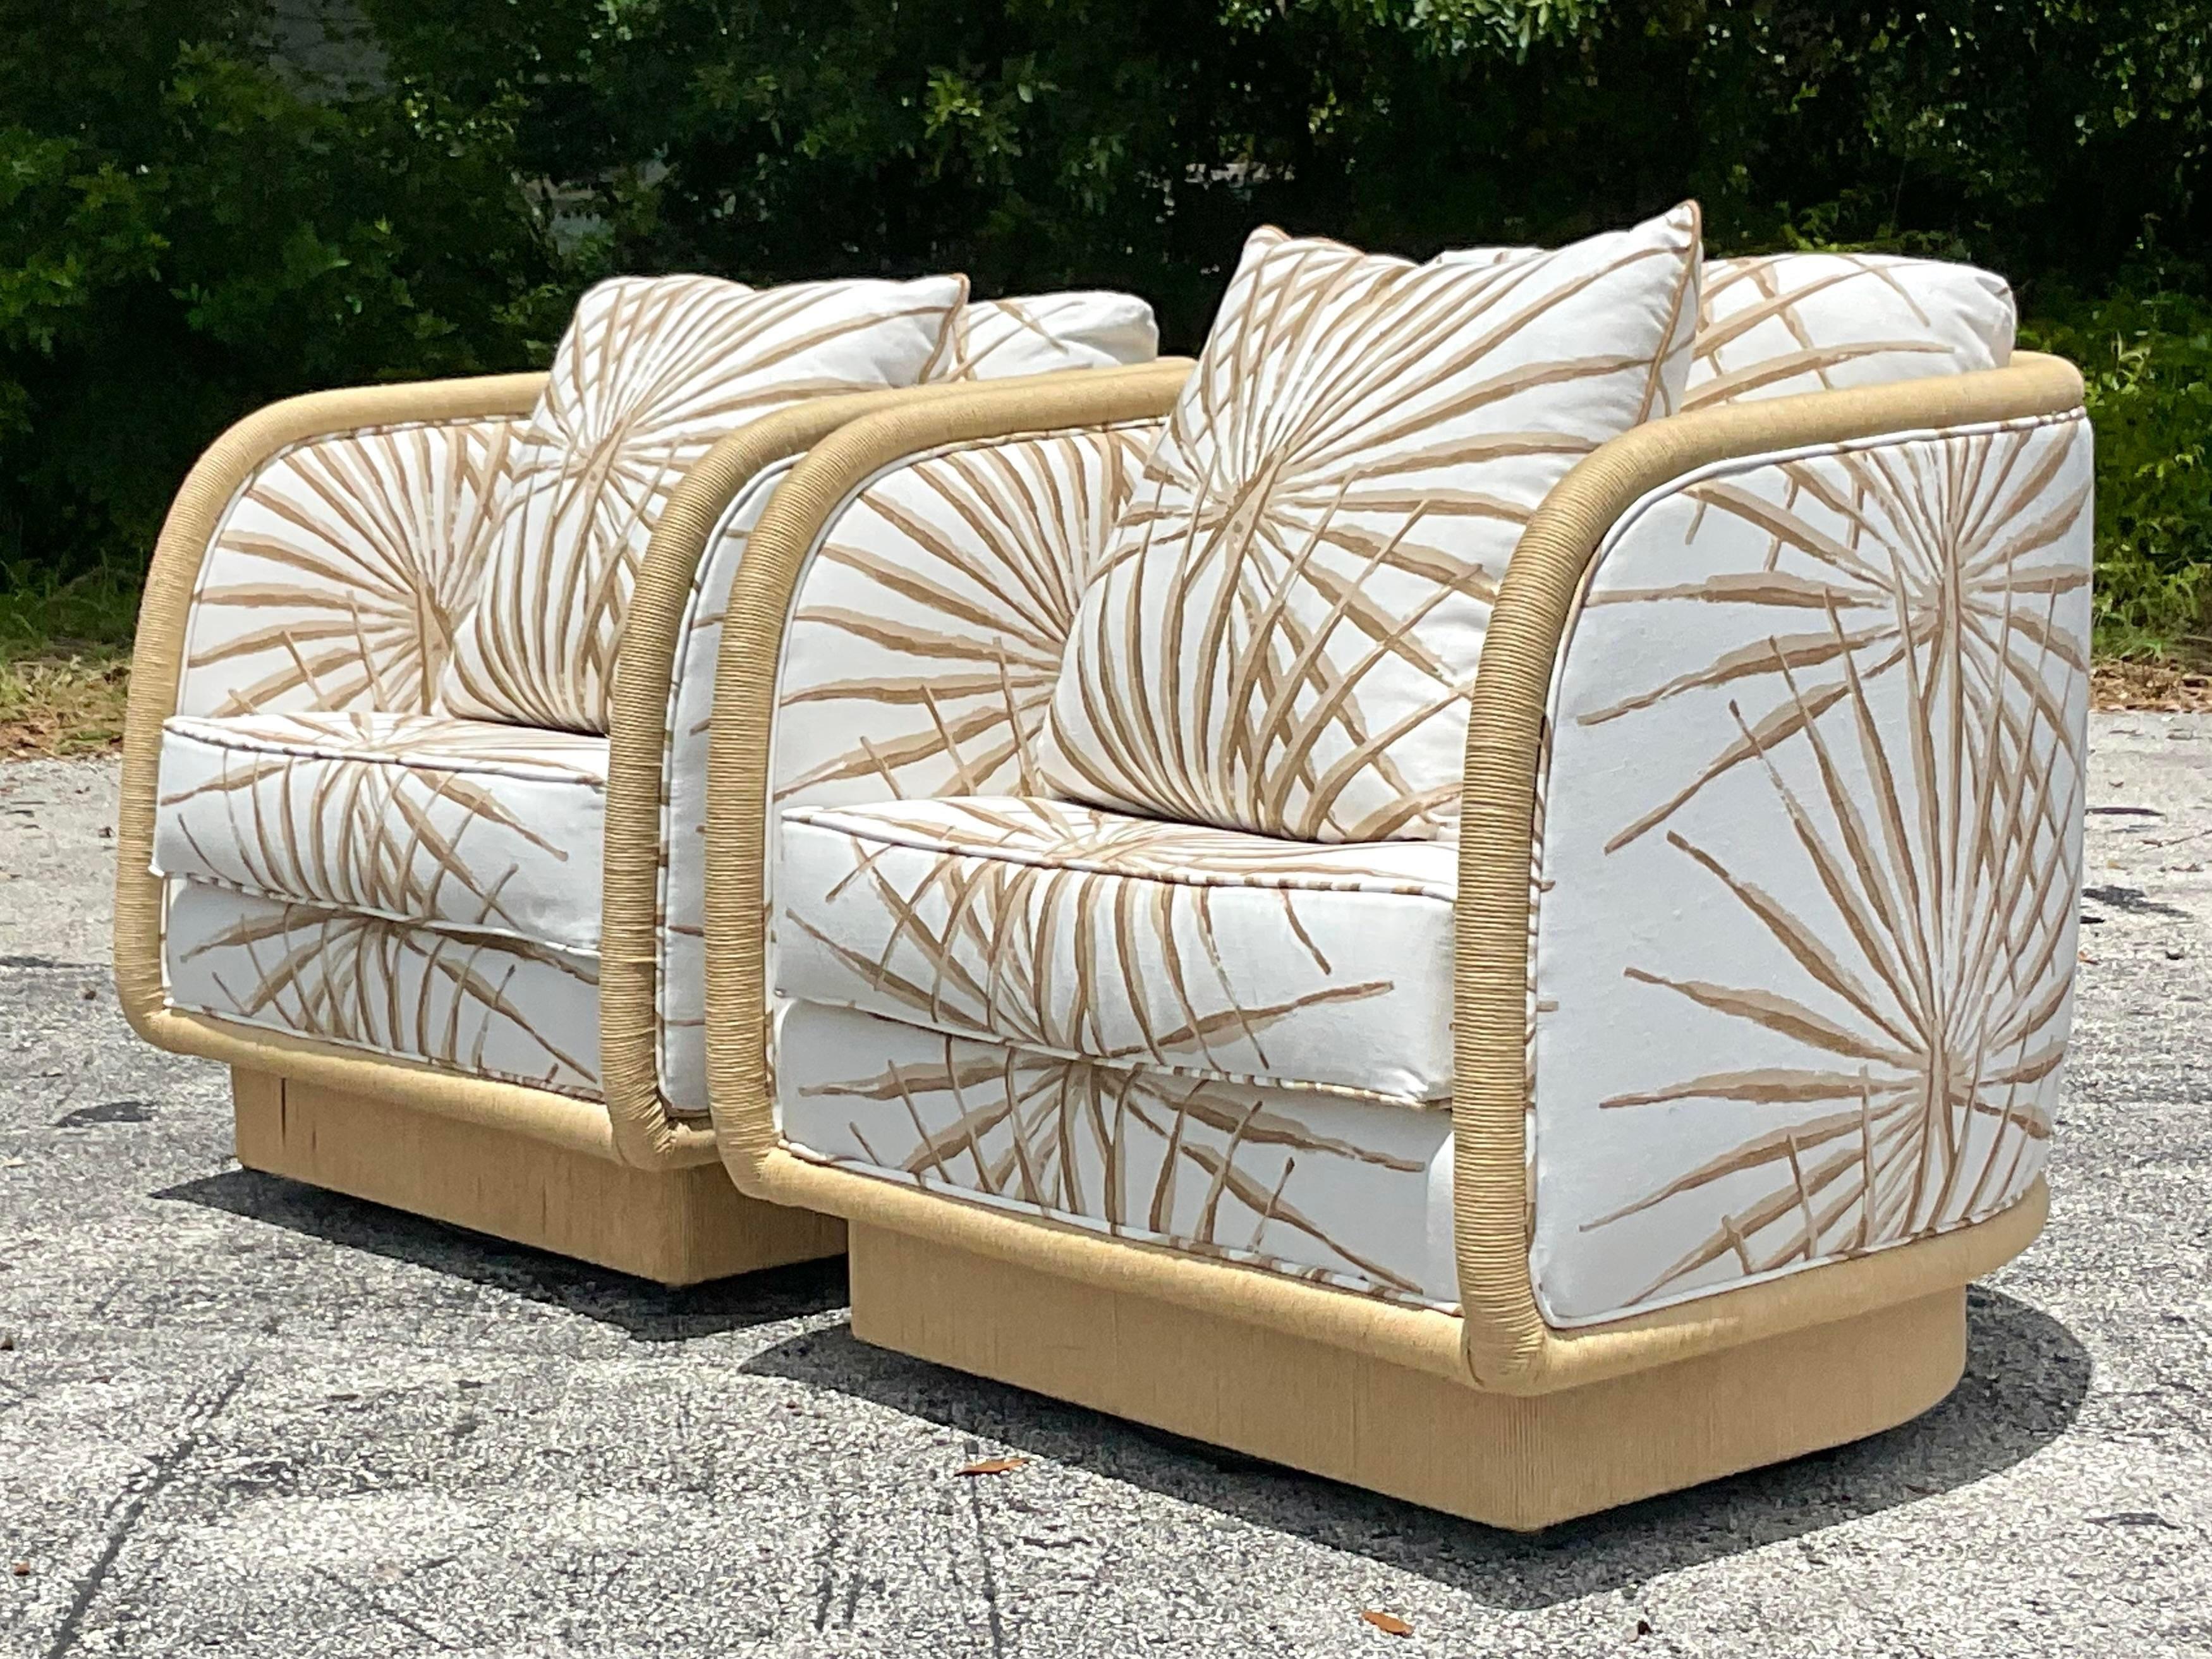 A fabulous pair of vintage Coastal swivel chairs. Designed by Laura Kirar for Baker Furniture. Chic wrapped Danish cord with a custom Palmetto stripe from the legendary Palm Beach store “The Hive”. In pristine condition. Acquired from a Palm Beach